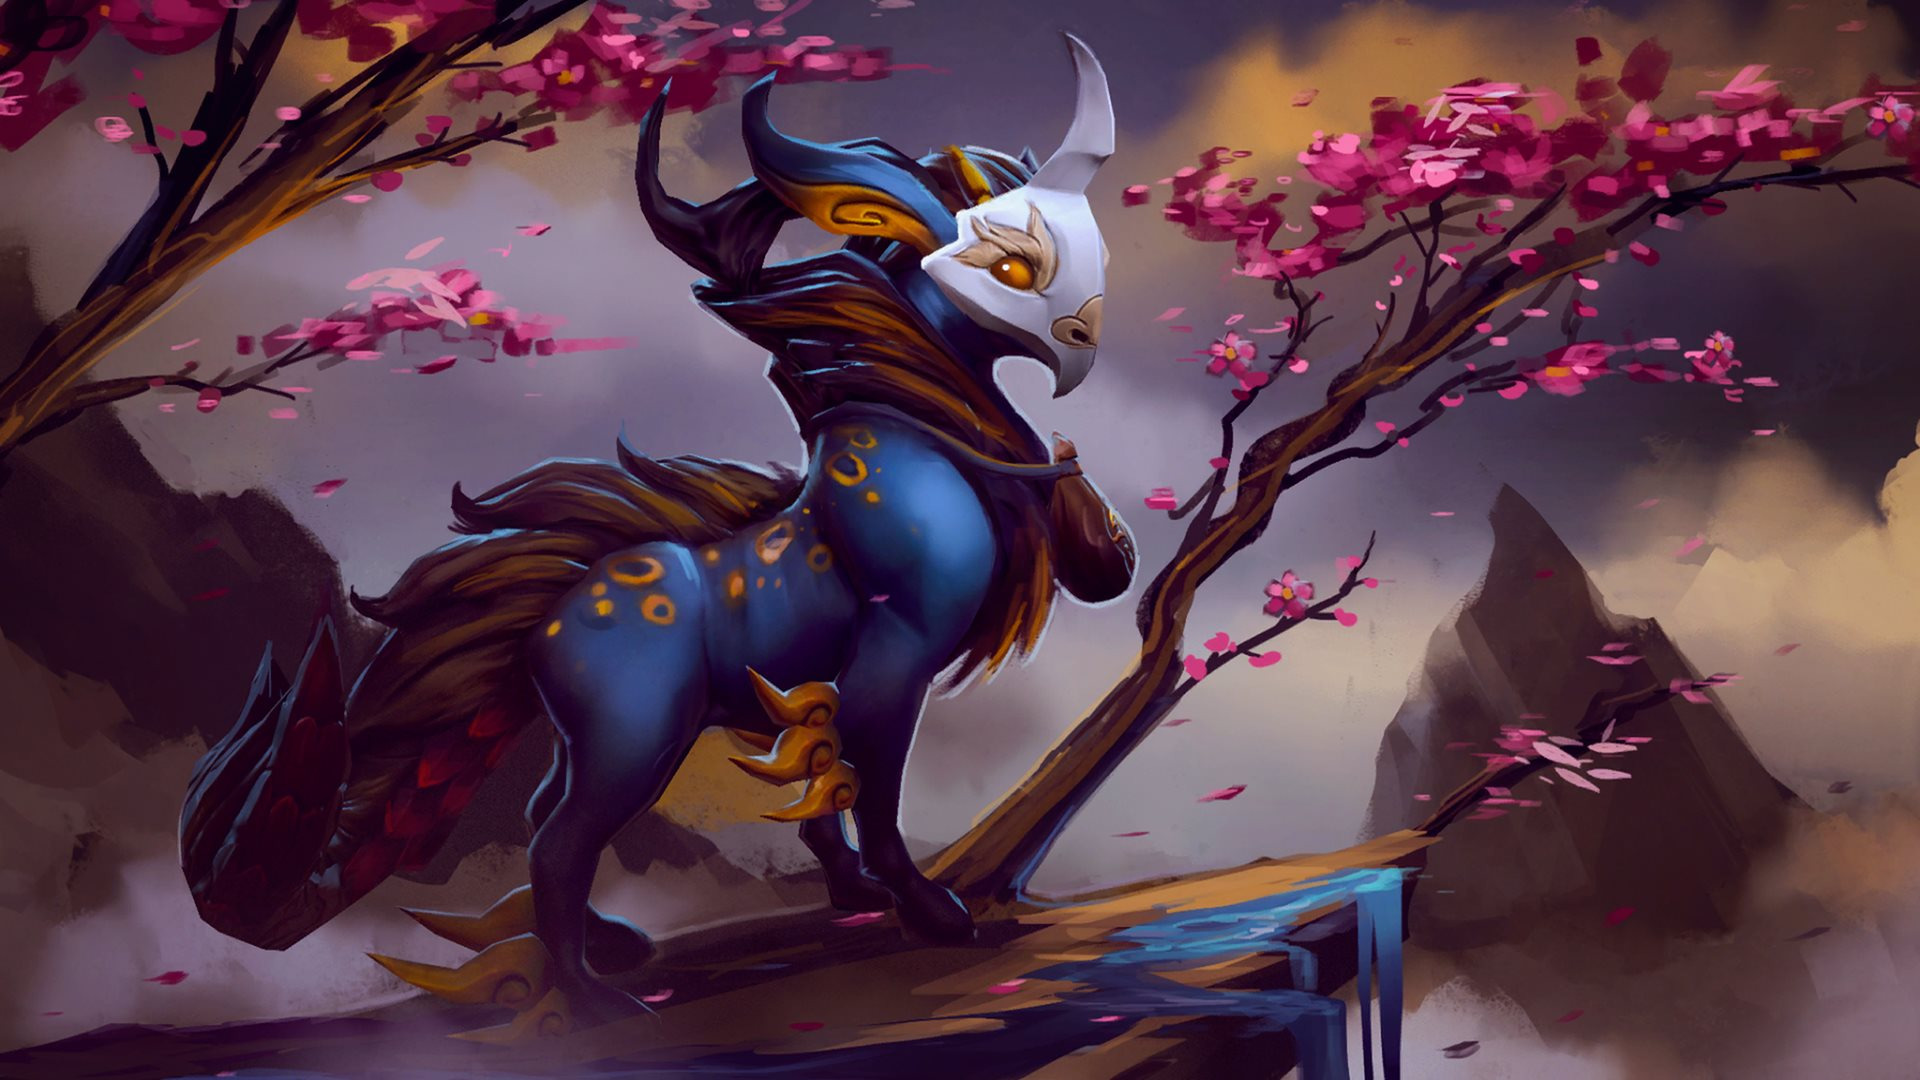 Heroes Defense Of The Ancient Dota Dota 2 Valve Valve Corporation Fantasy Art Dota 2 Courier Creature Wallpapers Hd Desktop And Mobile Backgrounds